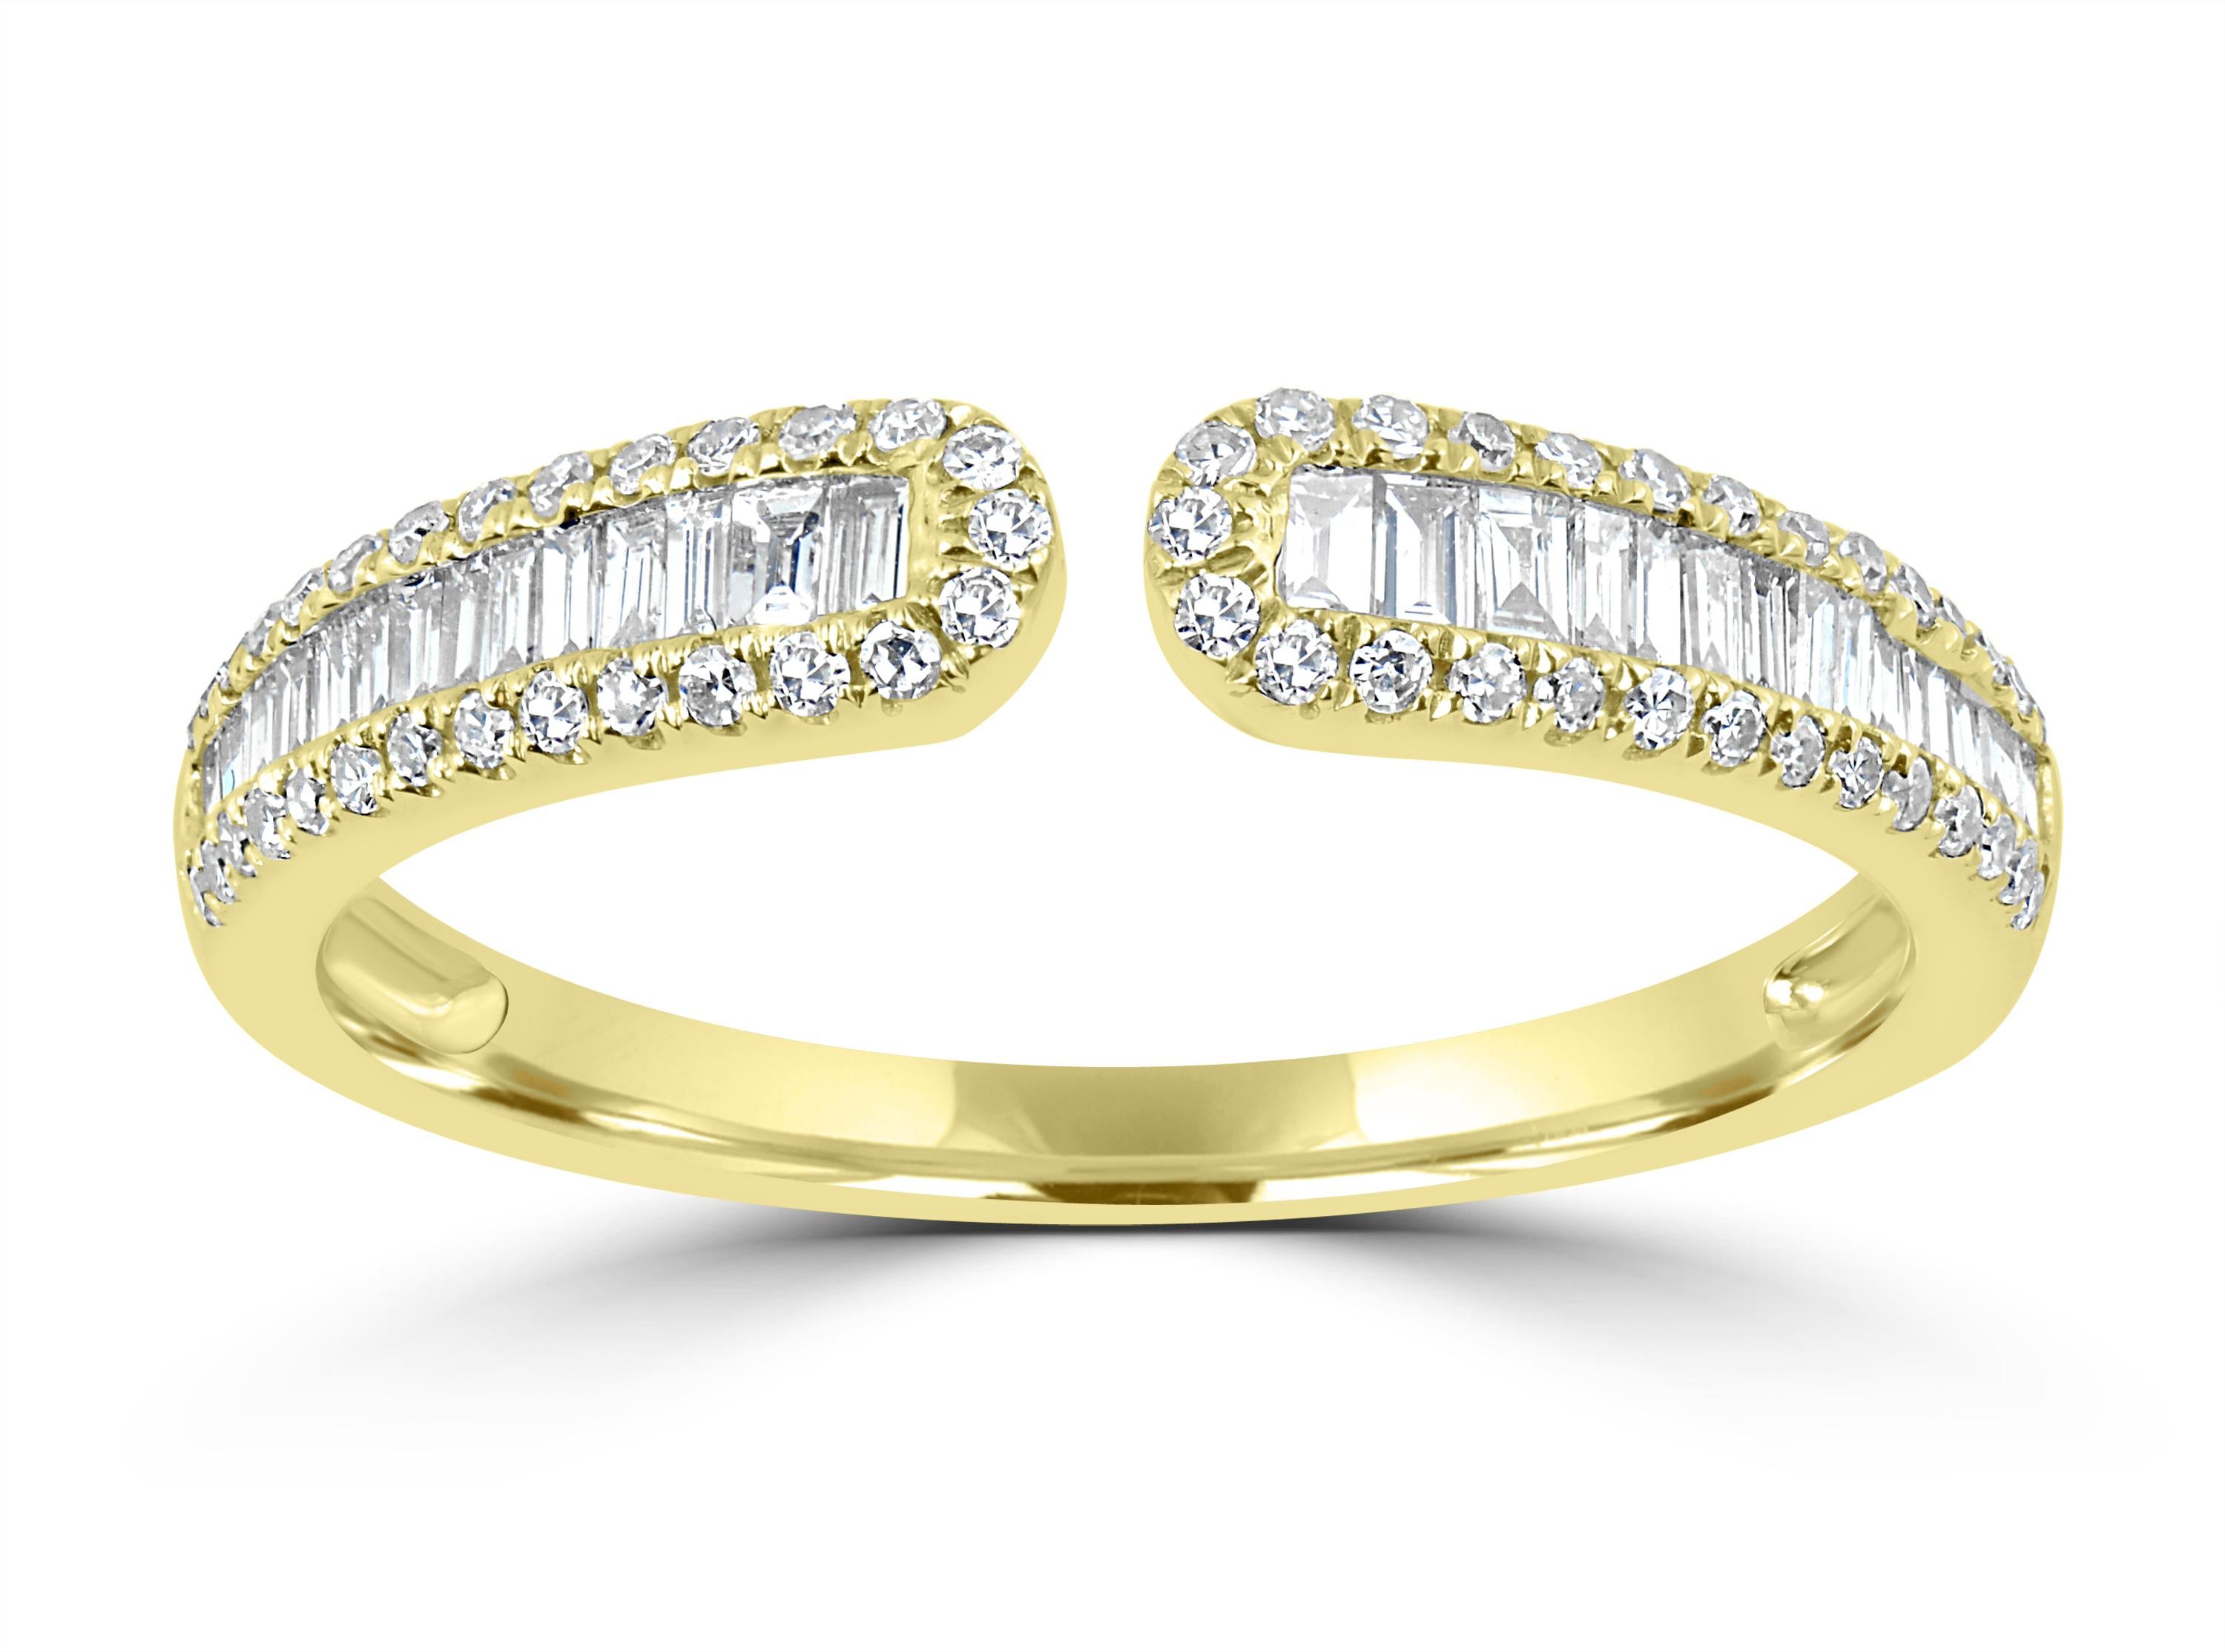 This gorgeous Luxle ring shimmer with baguettes framed in pave diamonds on either sides  in 14K yellow gold that give this piece an elegant vibe that you will adore.
Please follow the Luxury Jewels storefront to view the latest collections &